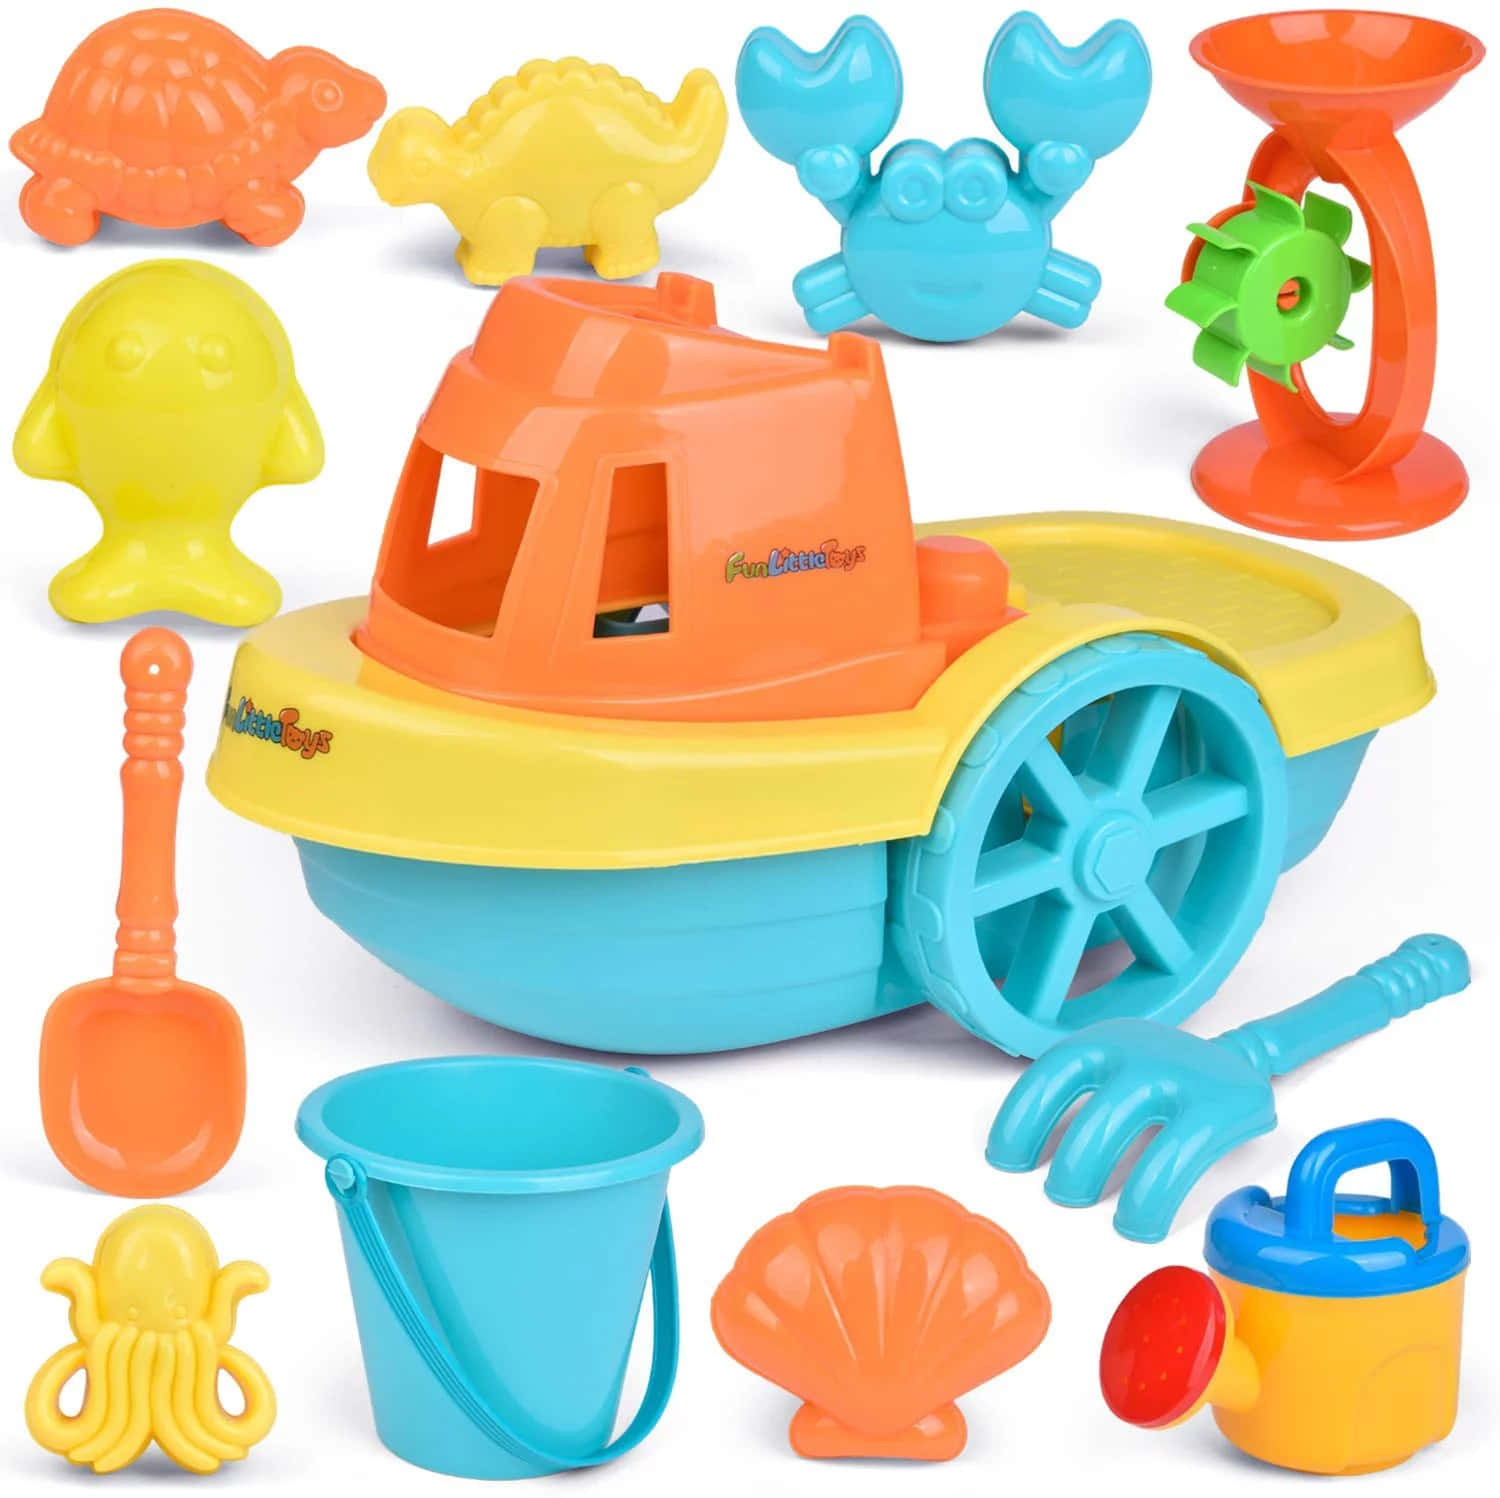 Caption: Fun Day at the Beach with Colorful Beach Toys Wallpaper